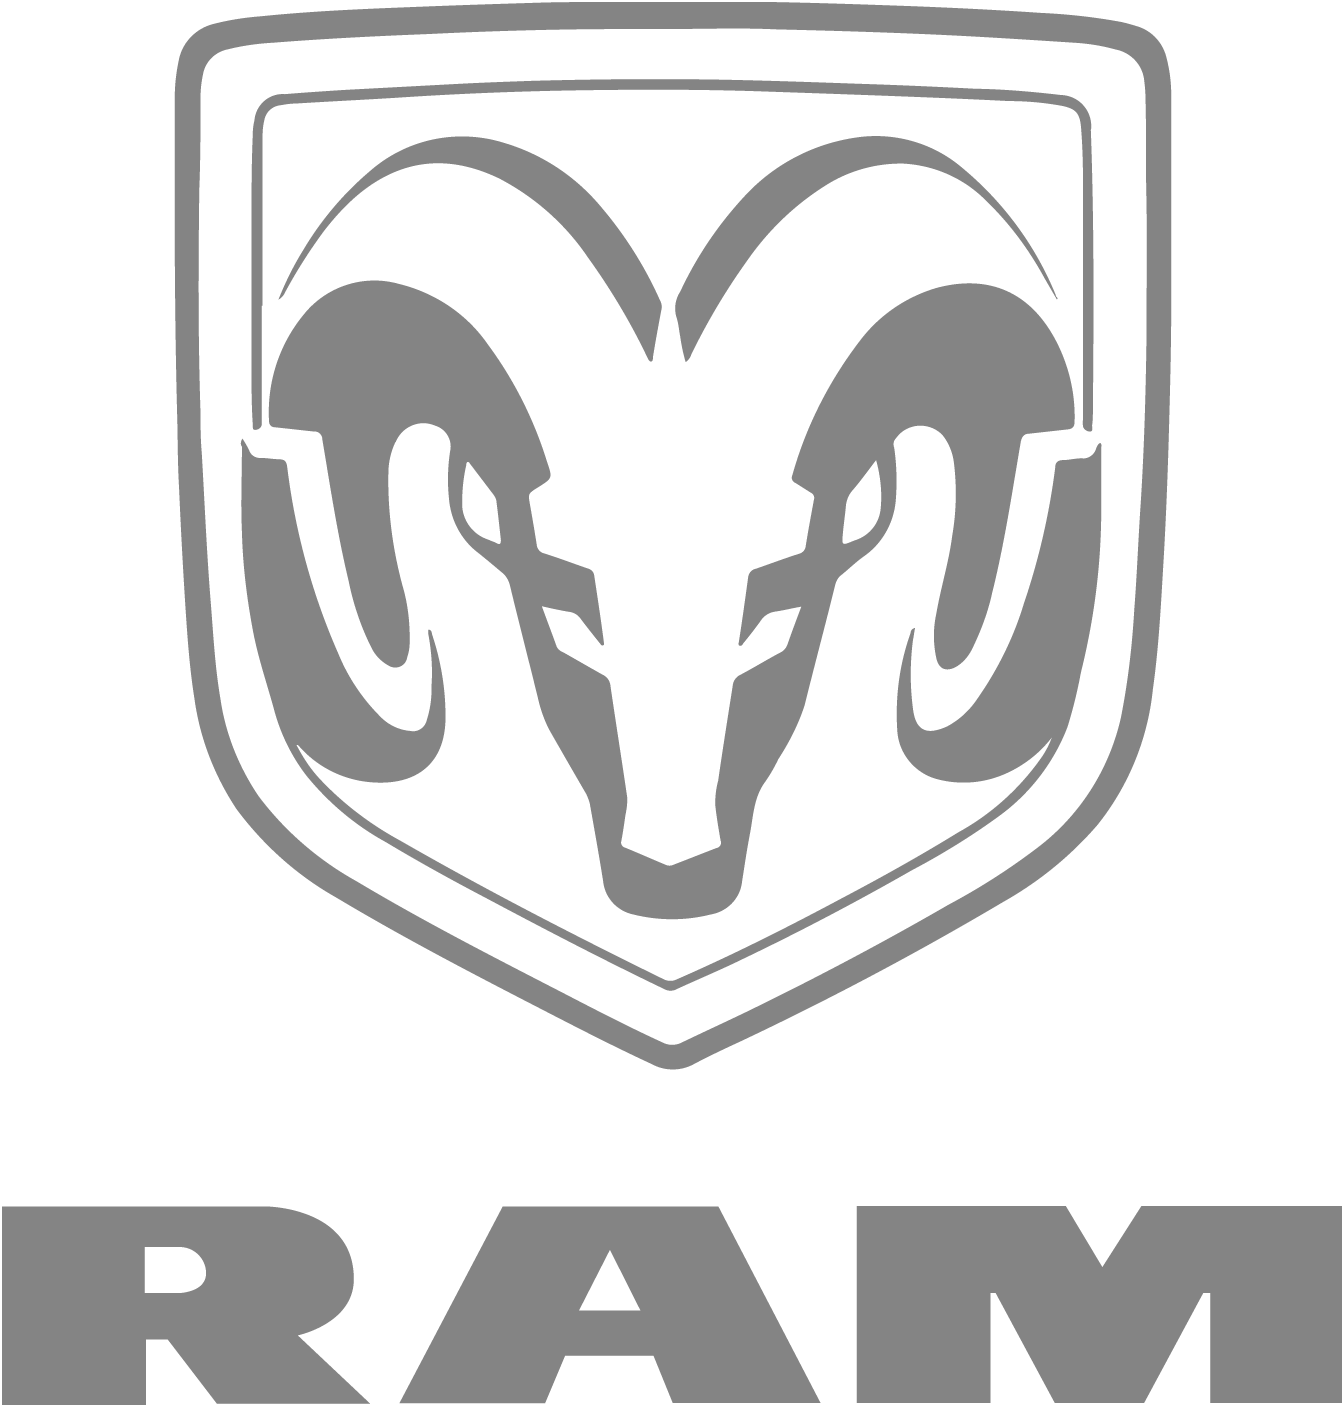 RAM Logo - Worksport Tonneau Covers are available for RAM trucks